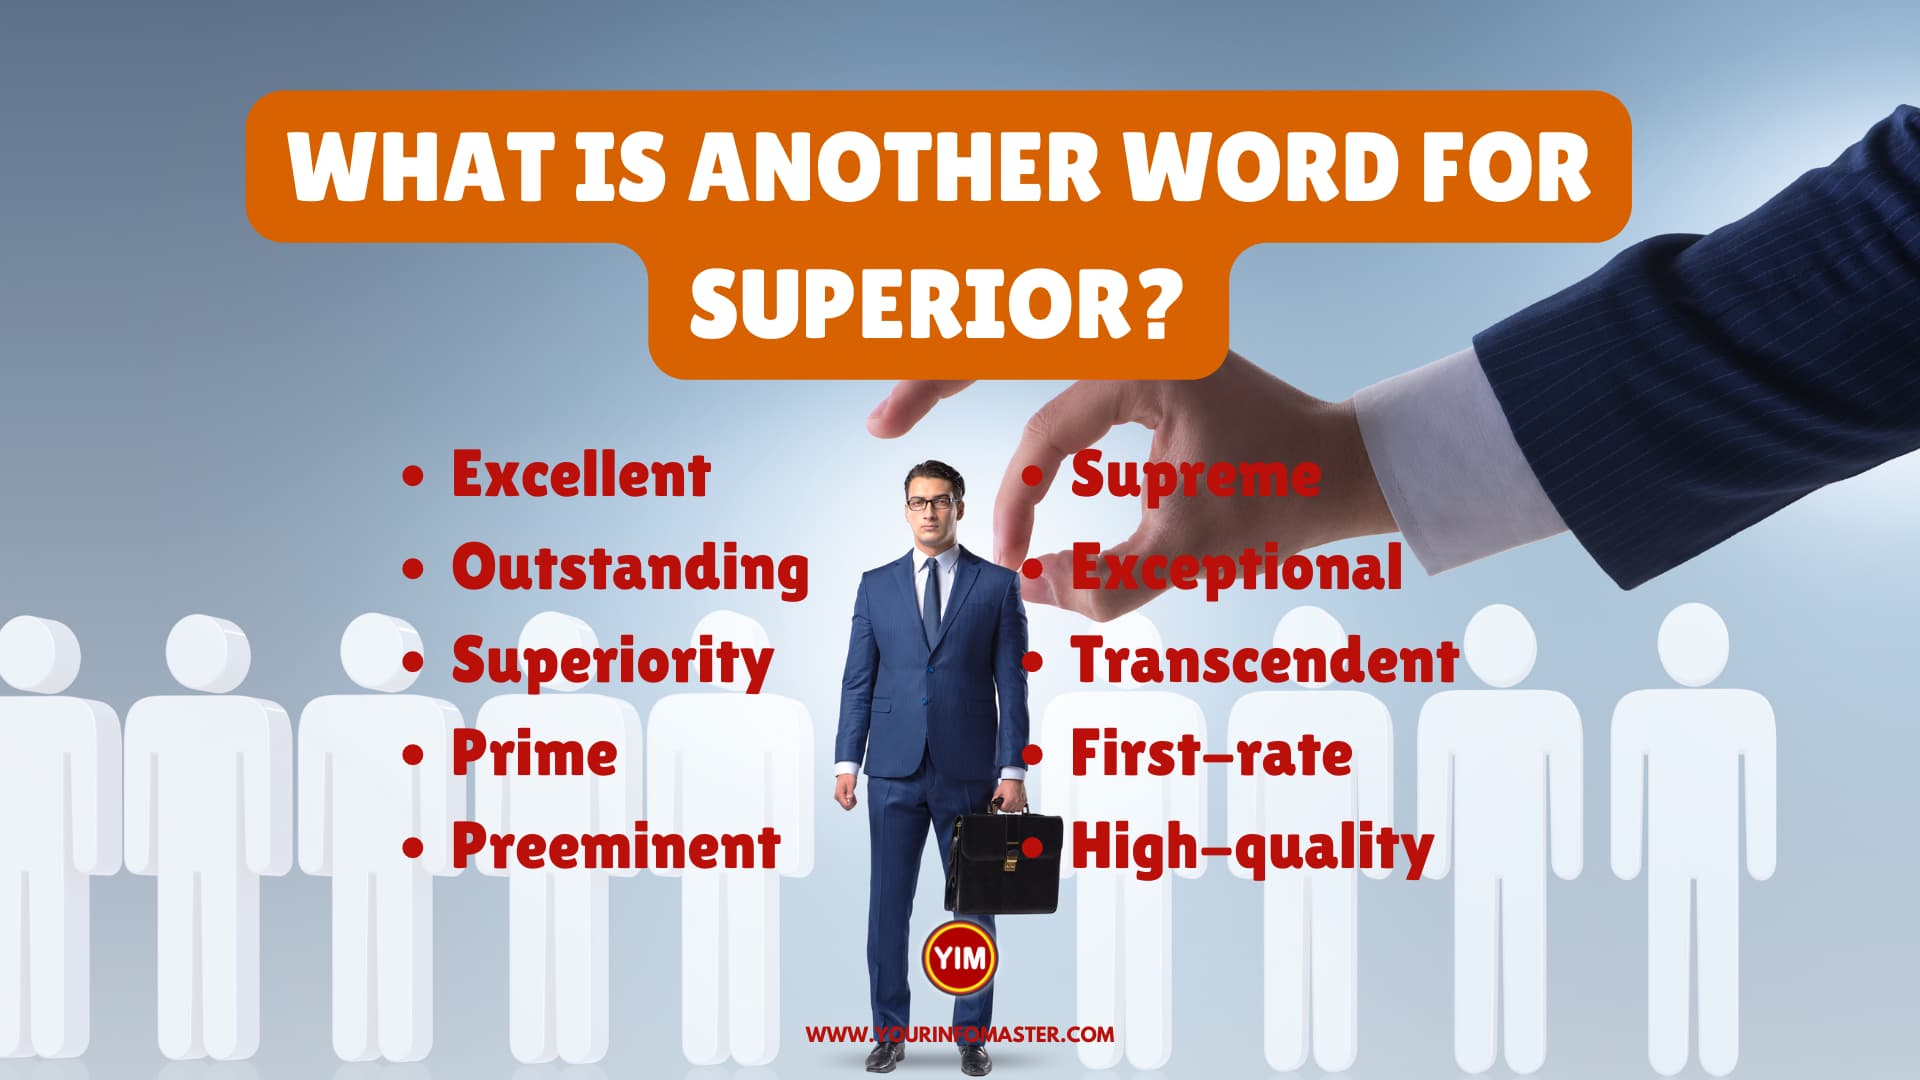 What is another word for Superior